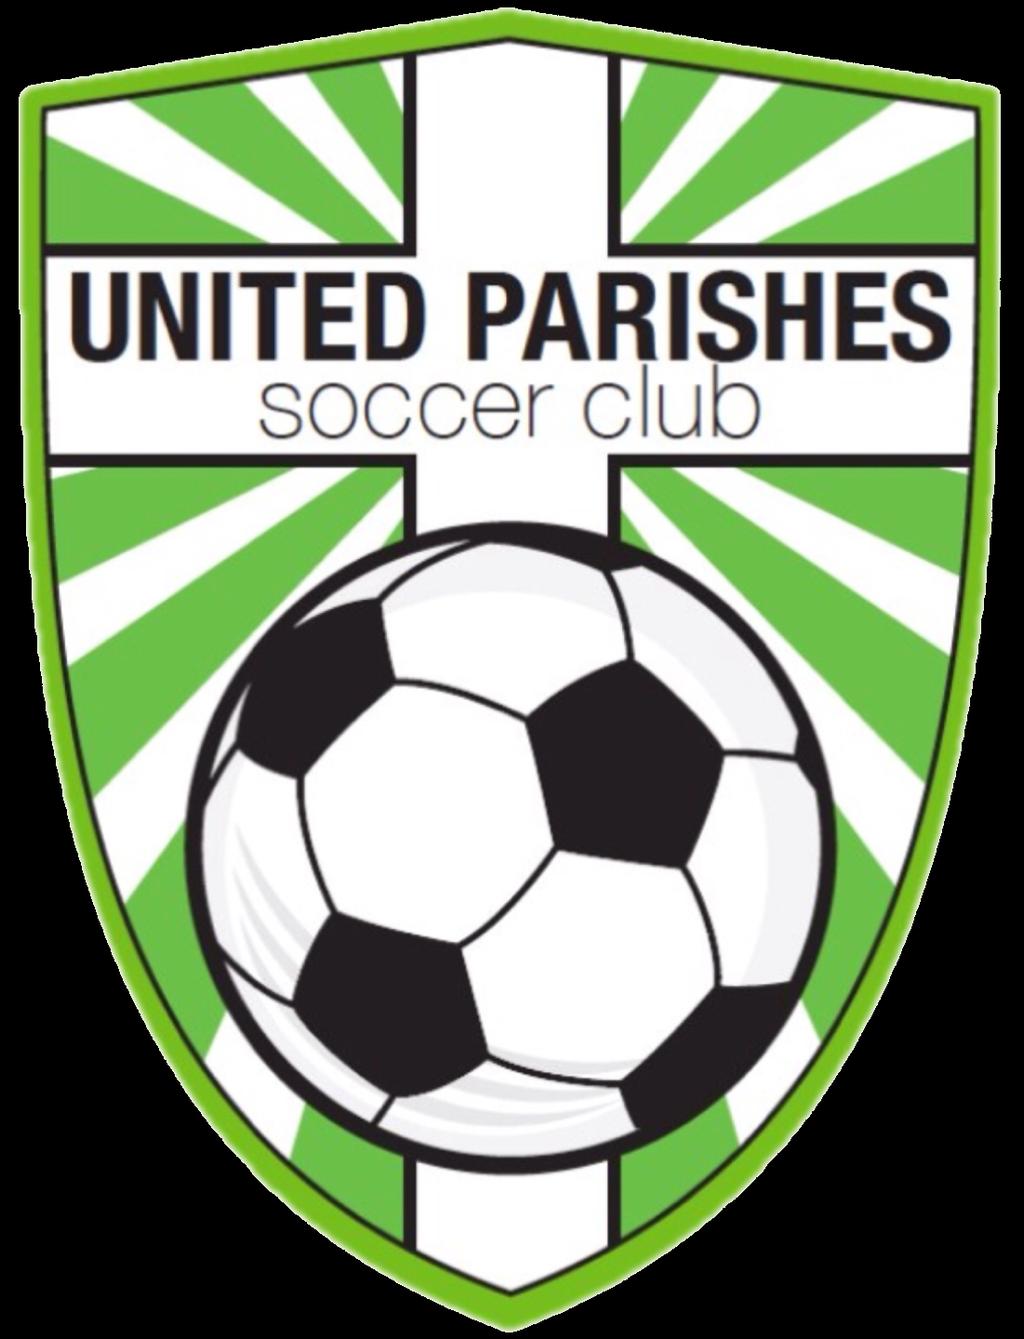 BYLAWS OF UNITED PARISHES SOCCER CLUB www.unpsoccer.org Article I. MEMBERSHIP The name of this organization shall be United Parishes Soccer Club, hereinafter referred to as UNP.